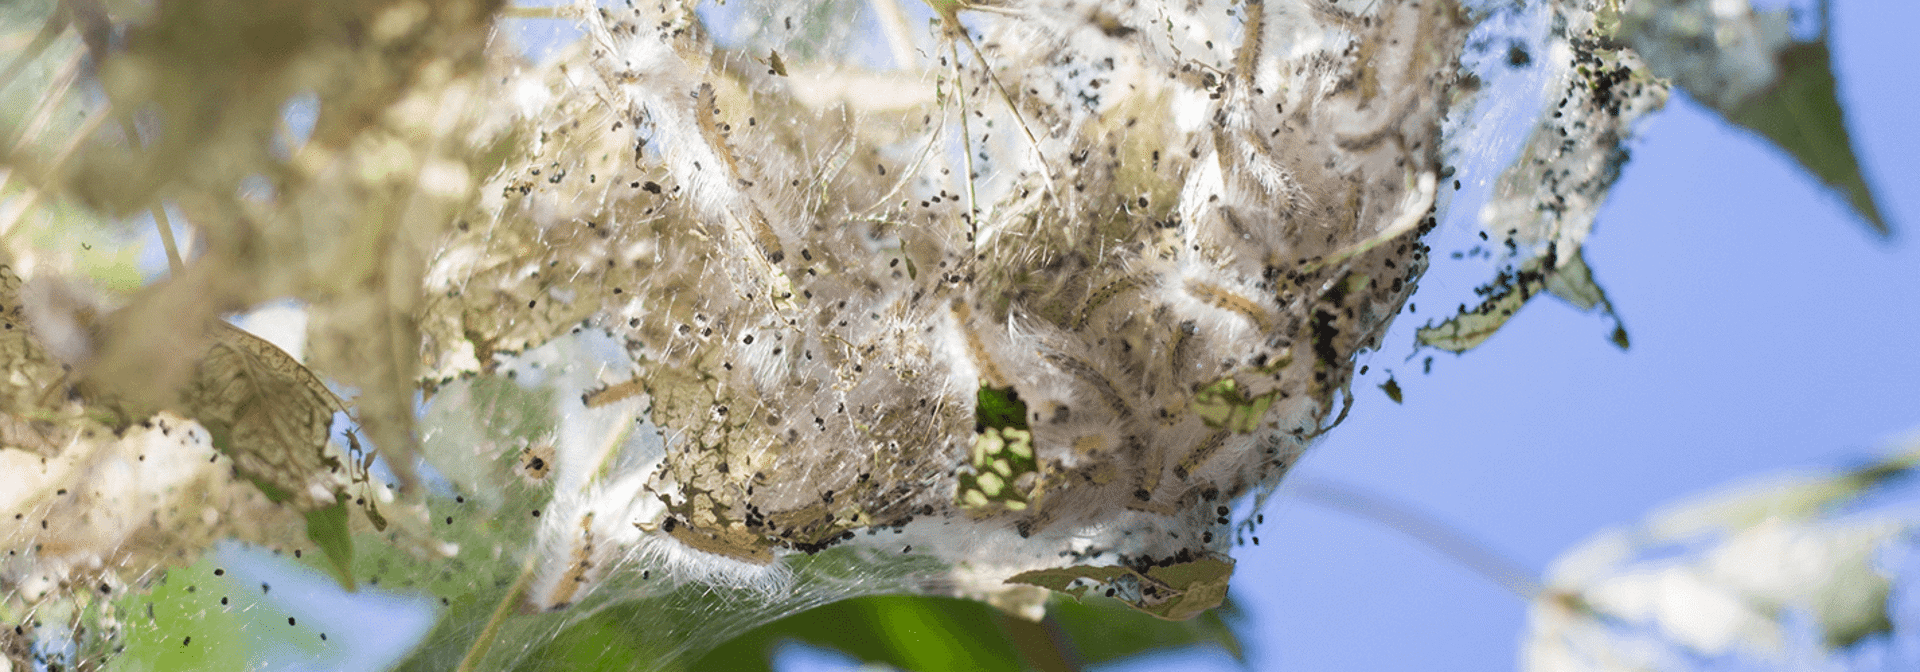 Spiders think with their webs, challenging our ideas of